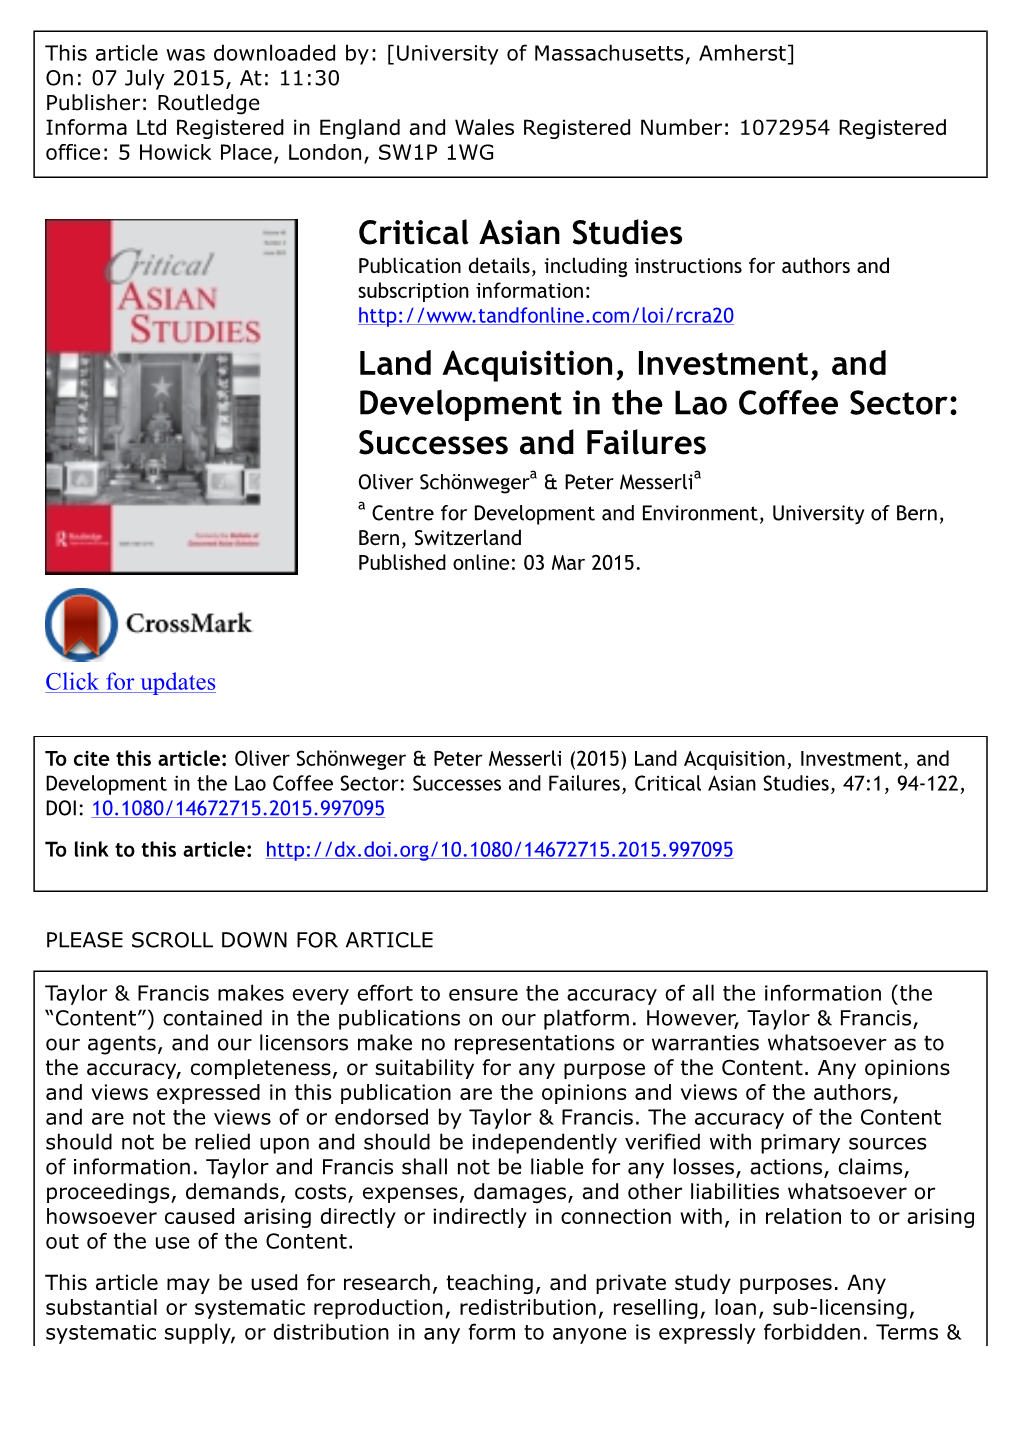 Land Acquisition, Investment, and Development in the Lao Coffee Sector